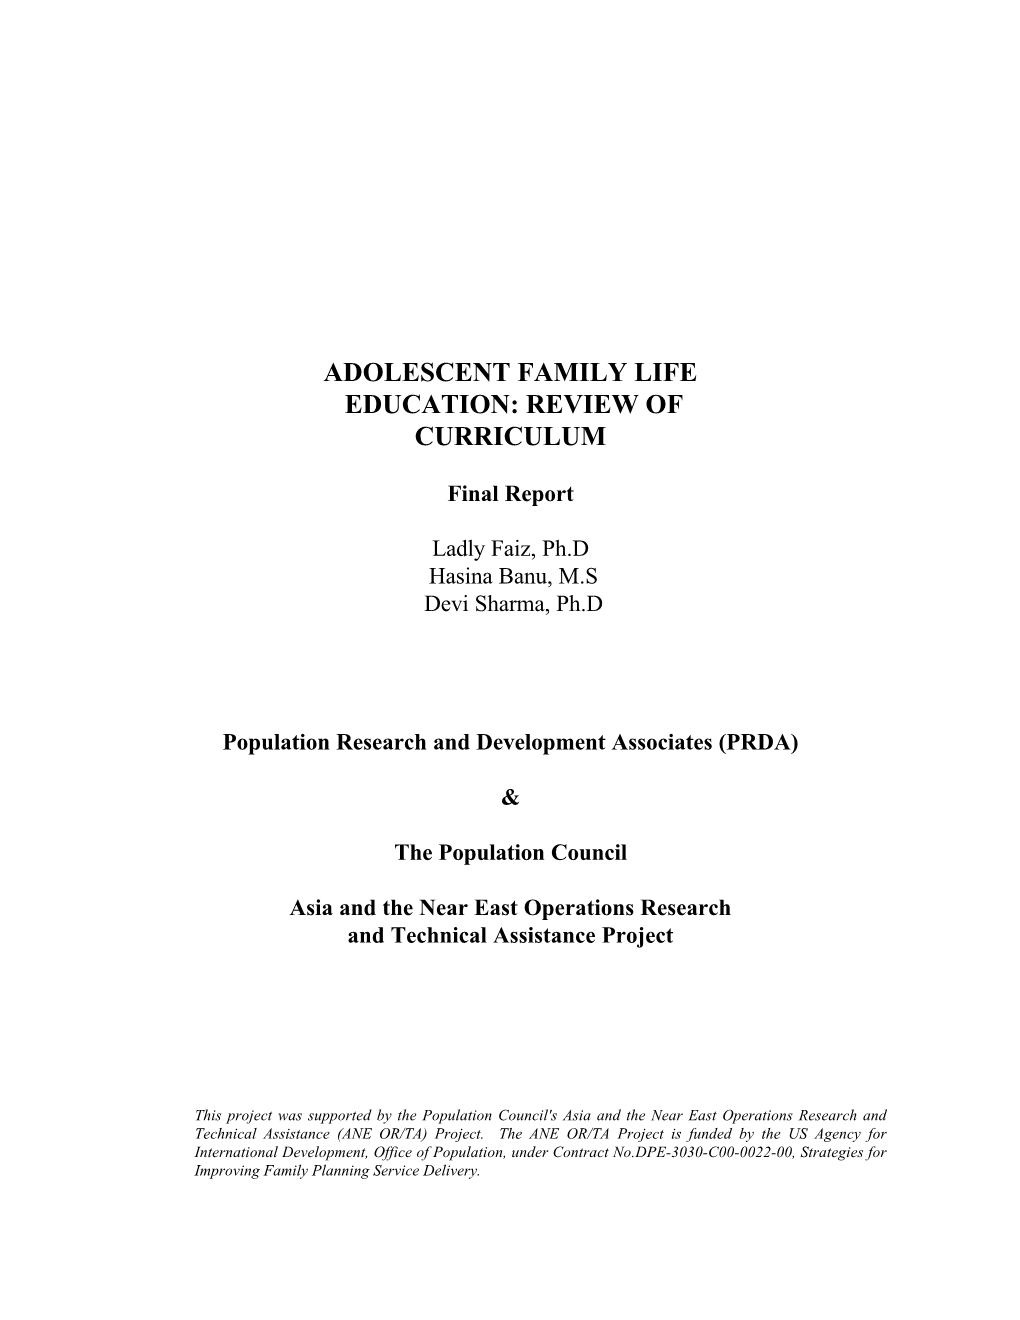 Adolescent Family Life Education: Review of Curriculum